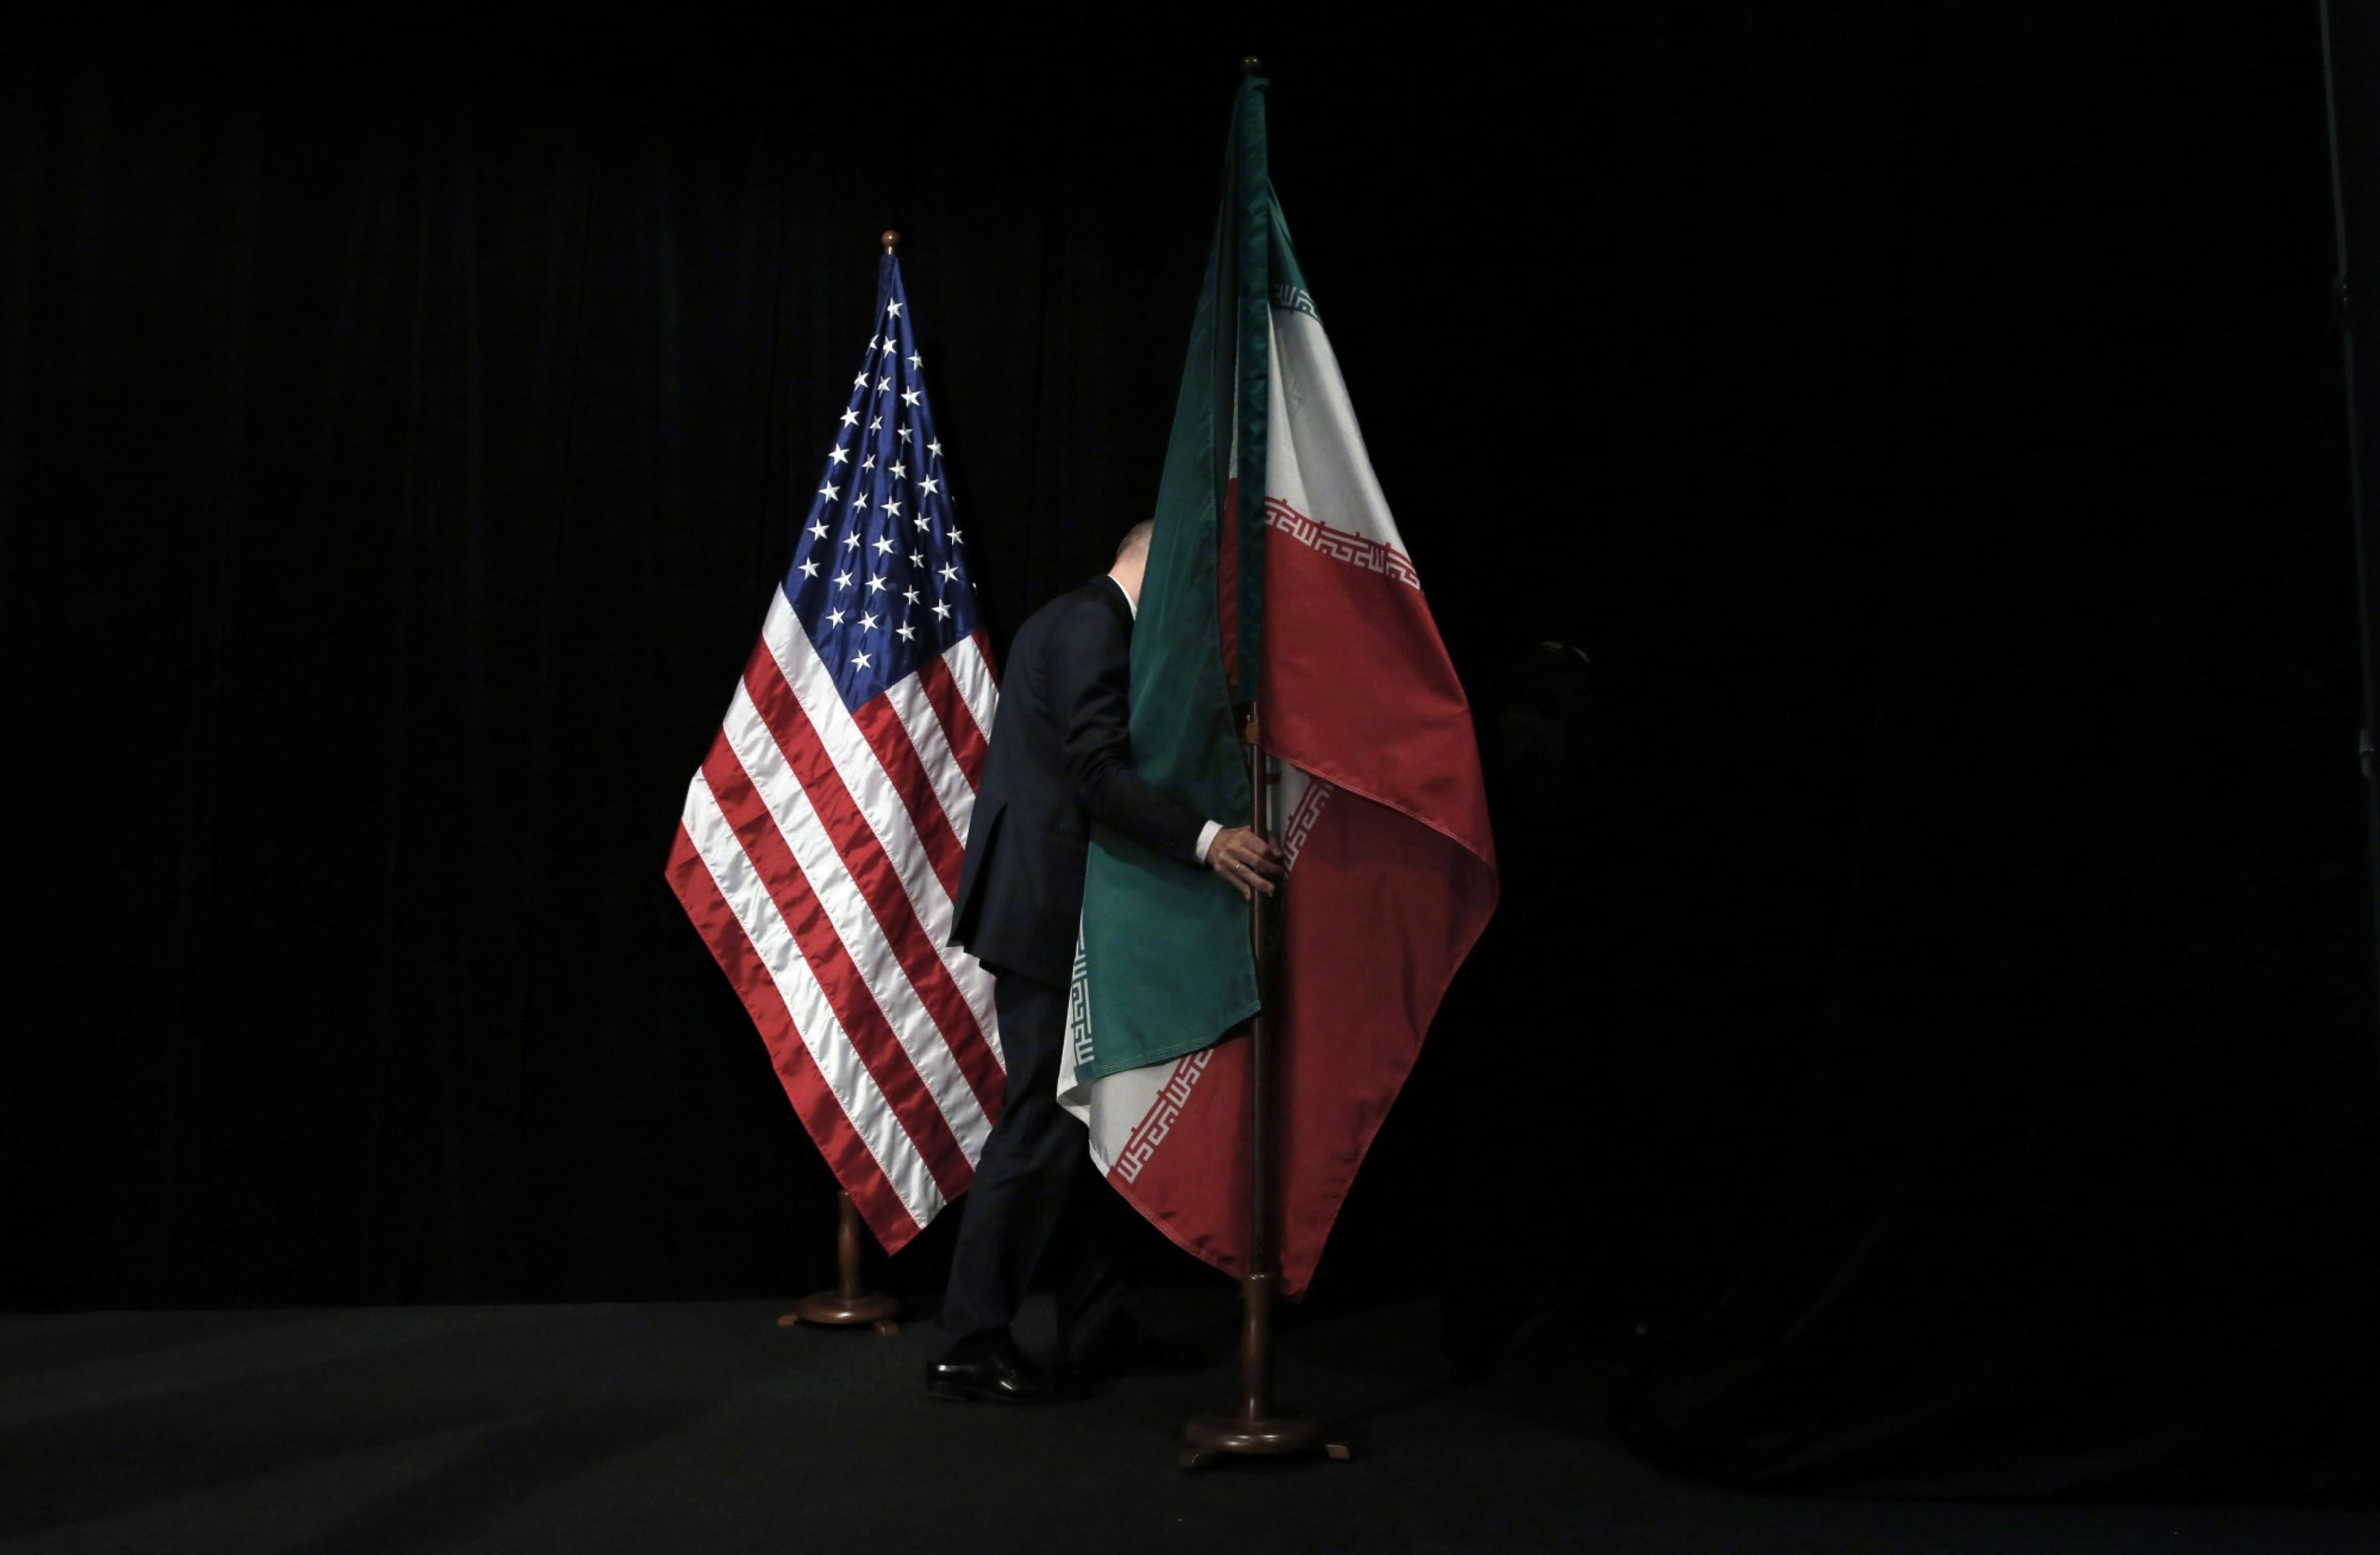 A staff member removes the Iranian flag from the stage after the Iran nuclear talks at Austria International Centre in Vienna, Austria on July 14, 2015. (AFP/Getty Images)